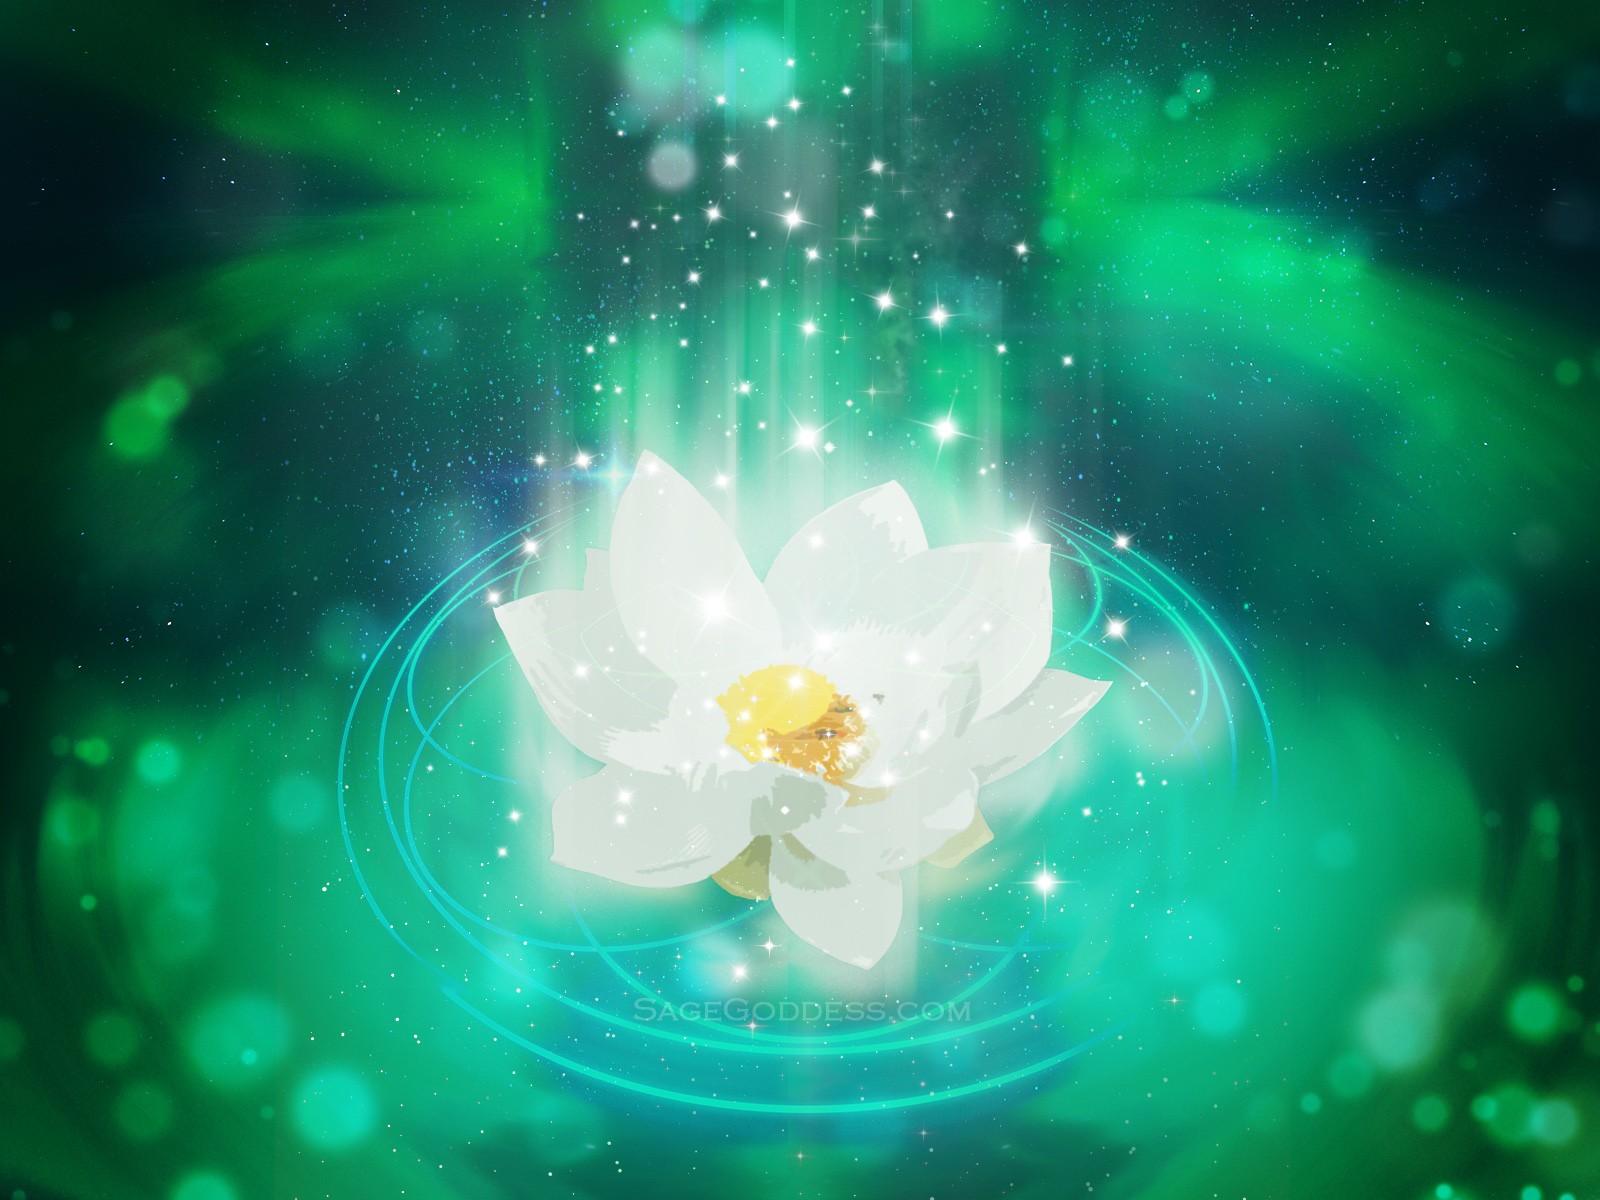 lotus backgrounds